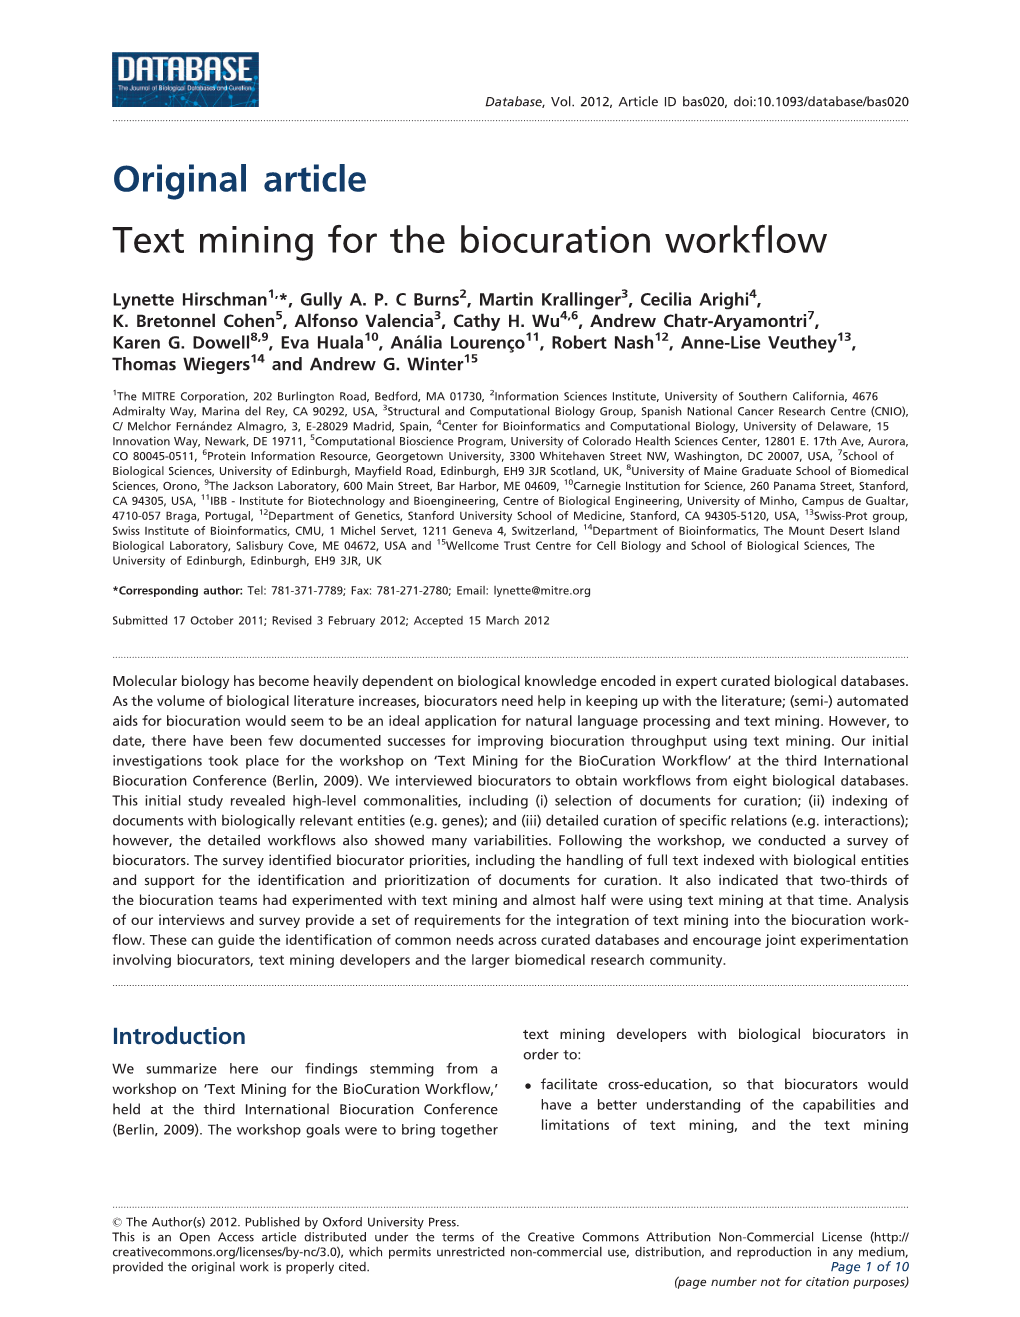 Original Article Text Mining for the Biocuration Workflow